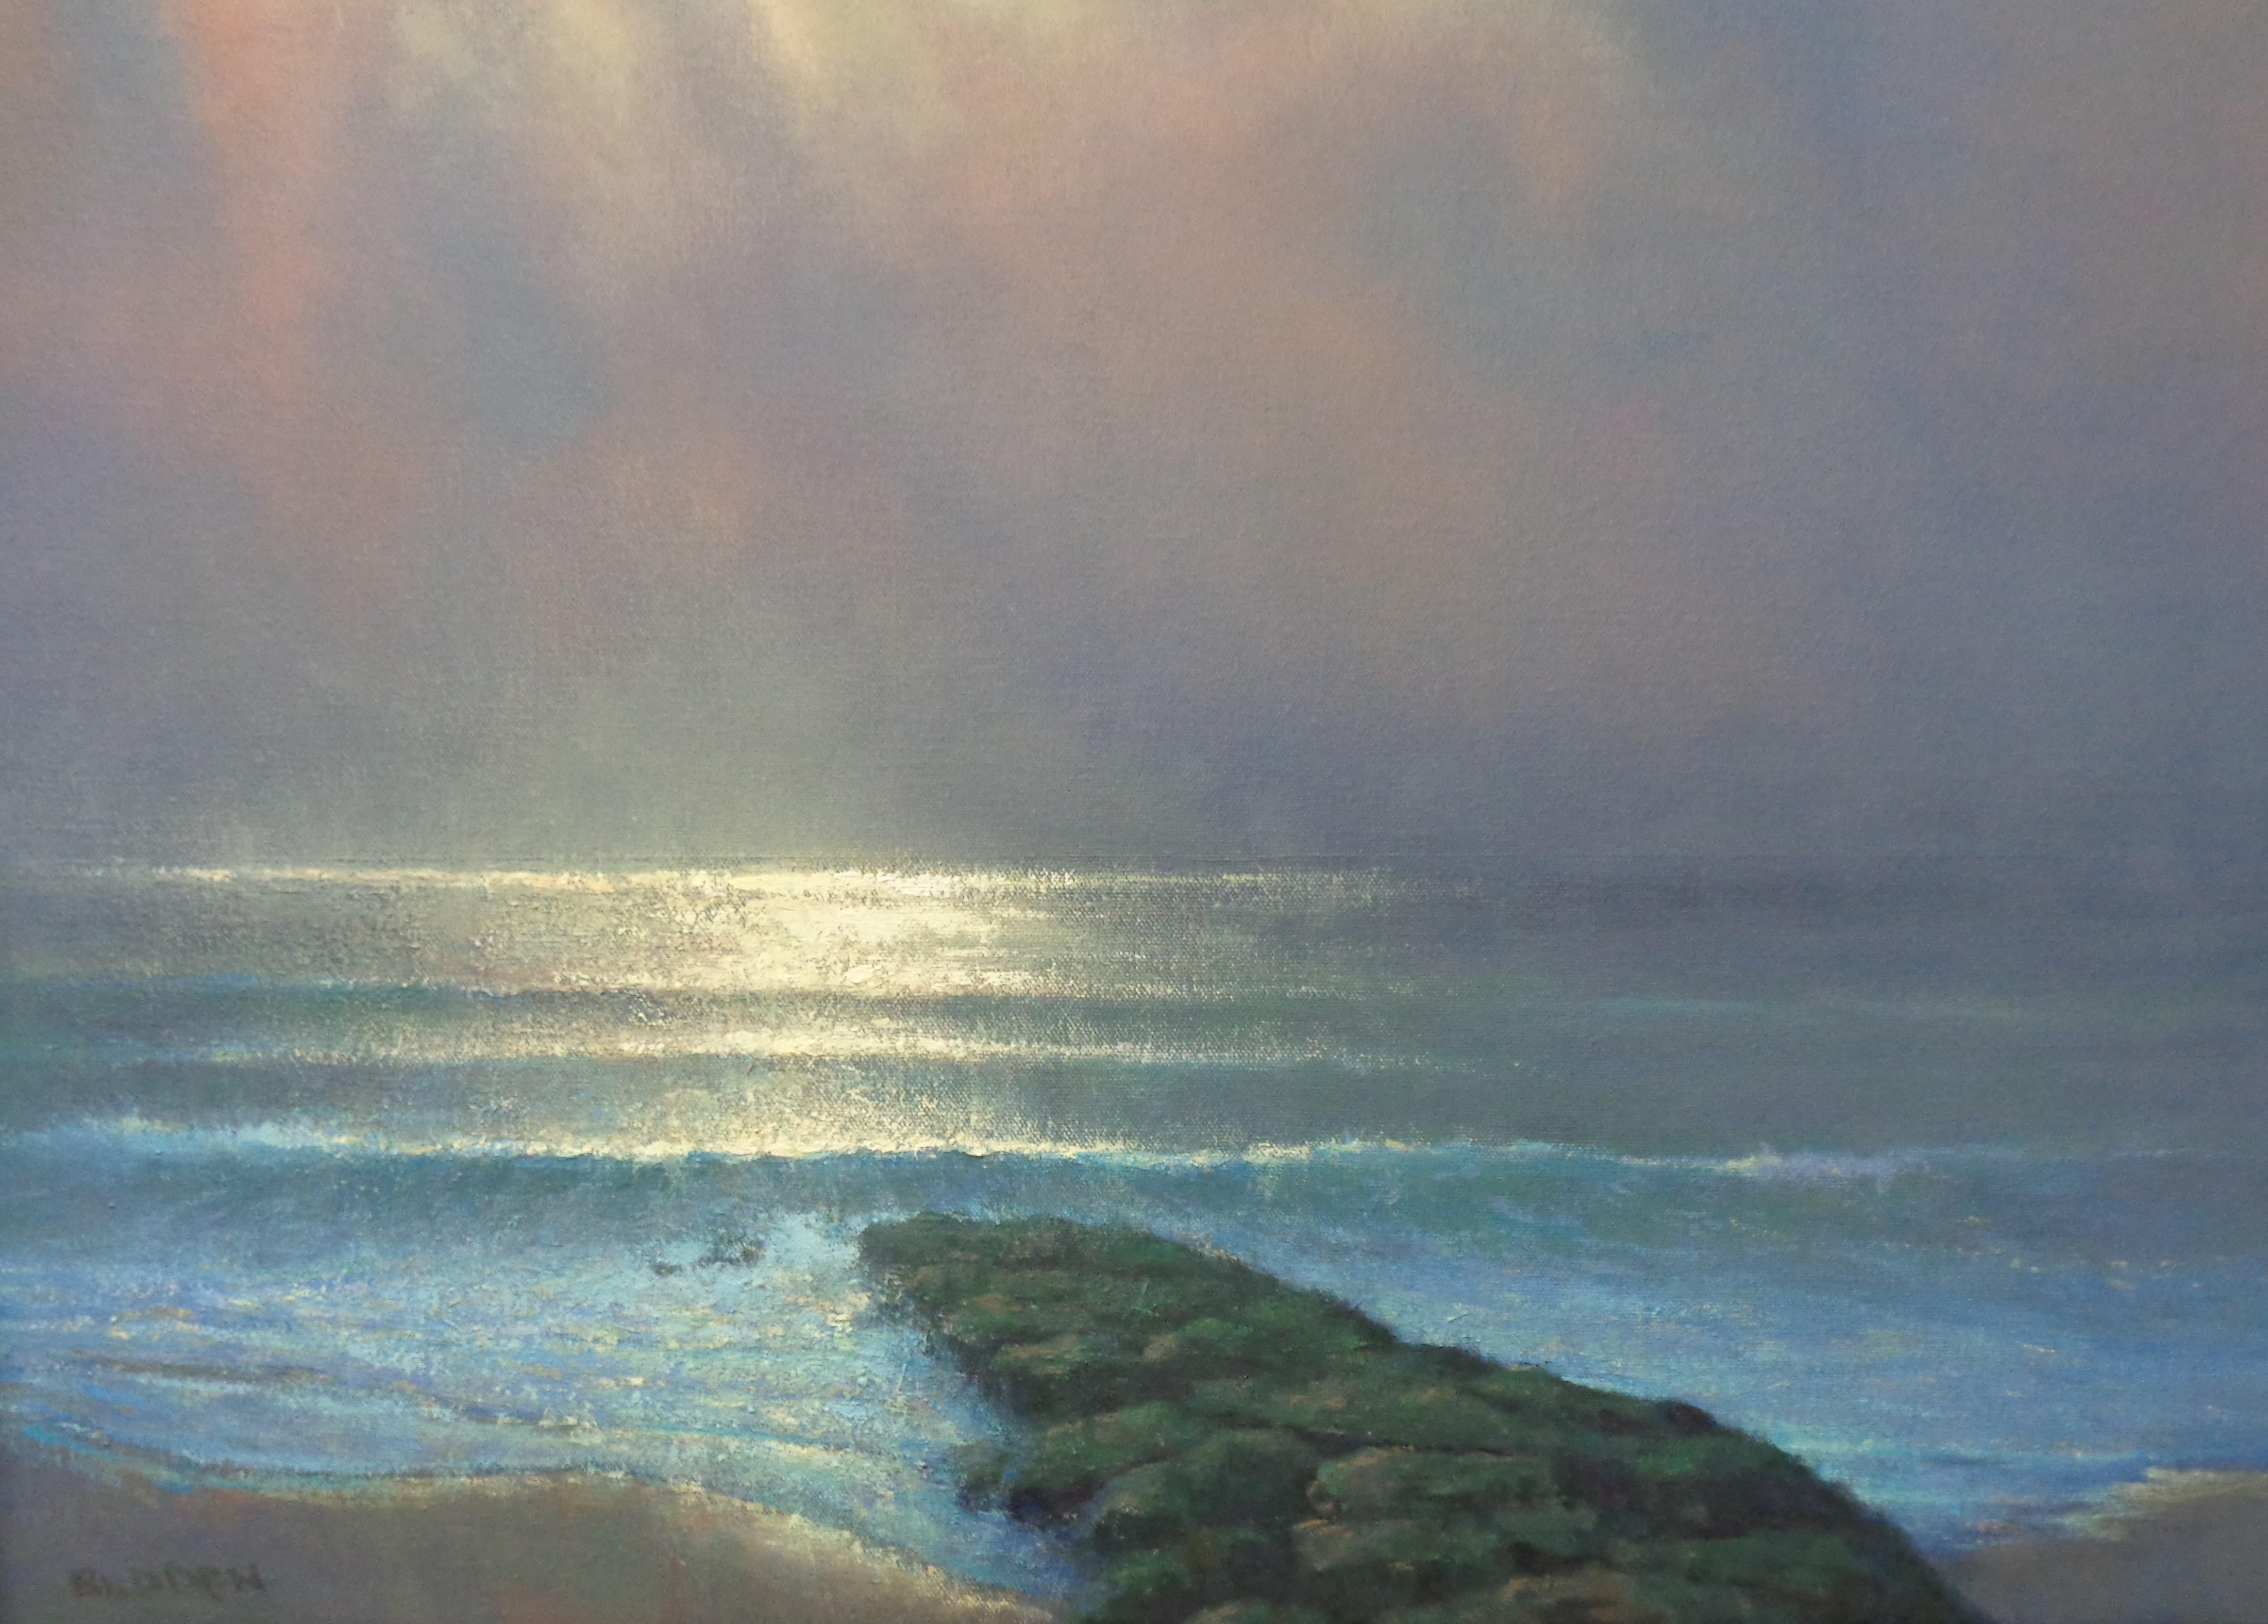  Impressionistic Moonlit Seascape Painting Michael Budden Sweet Moonlight II For Sale 4